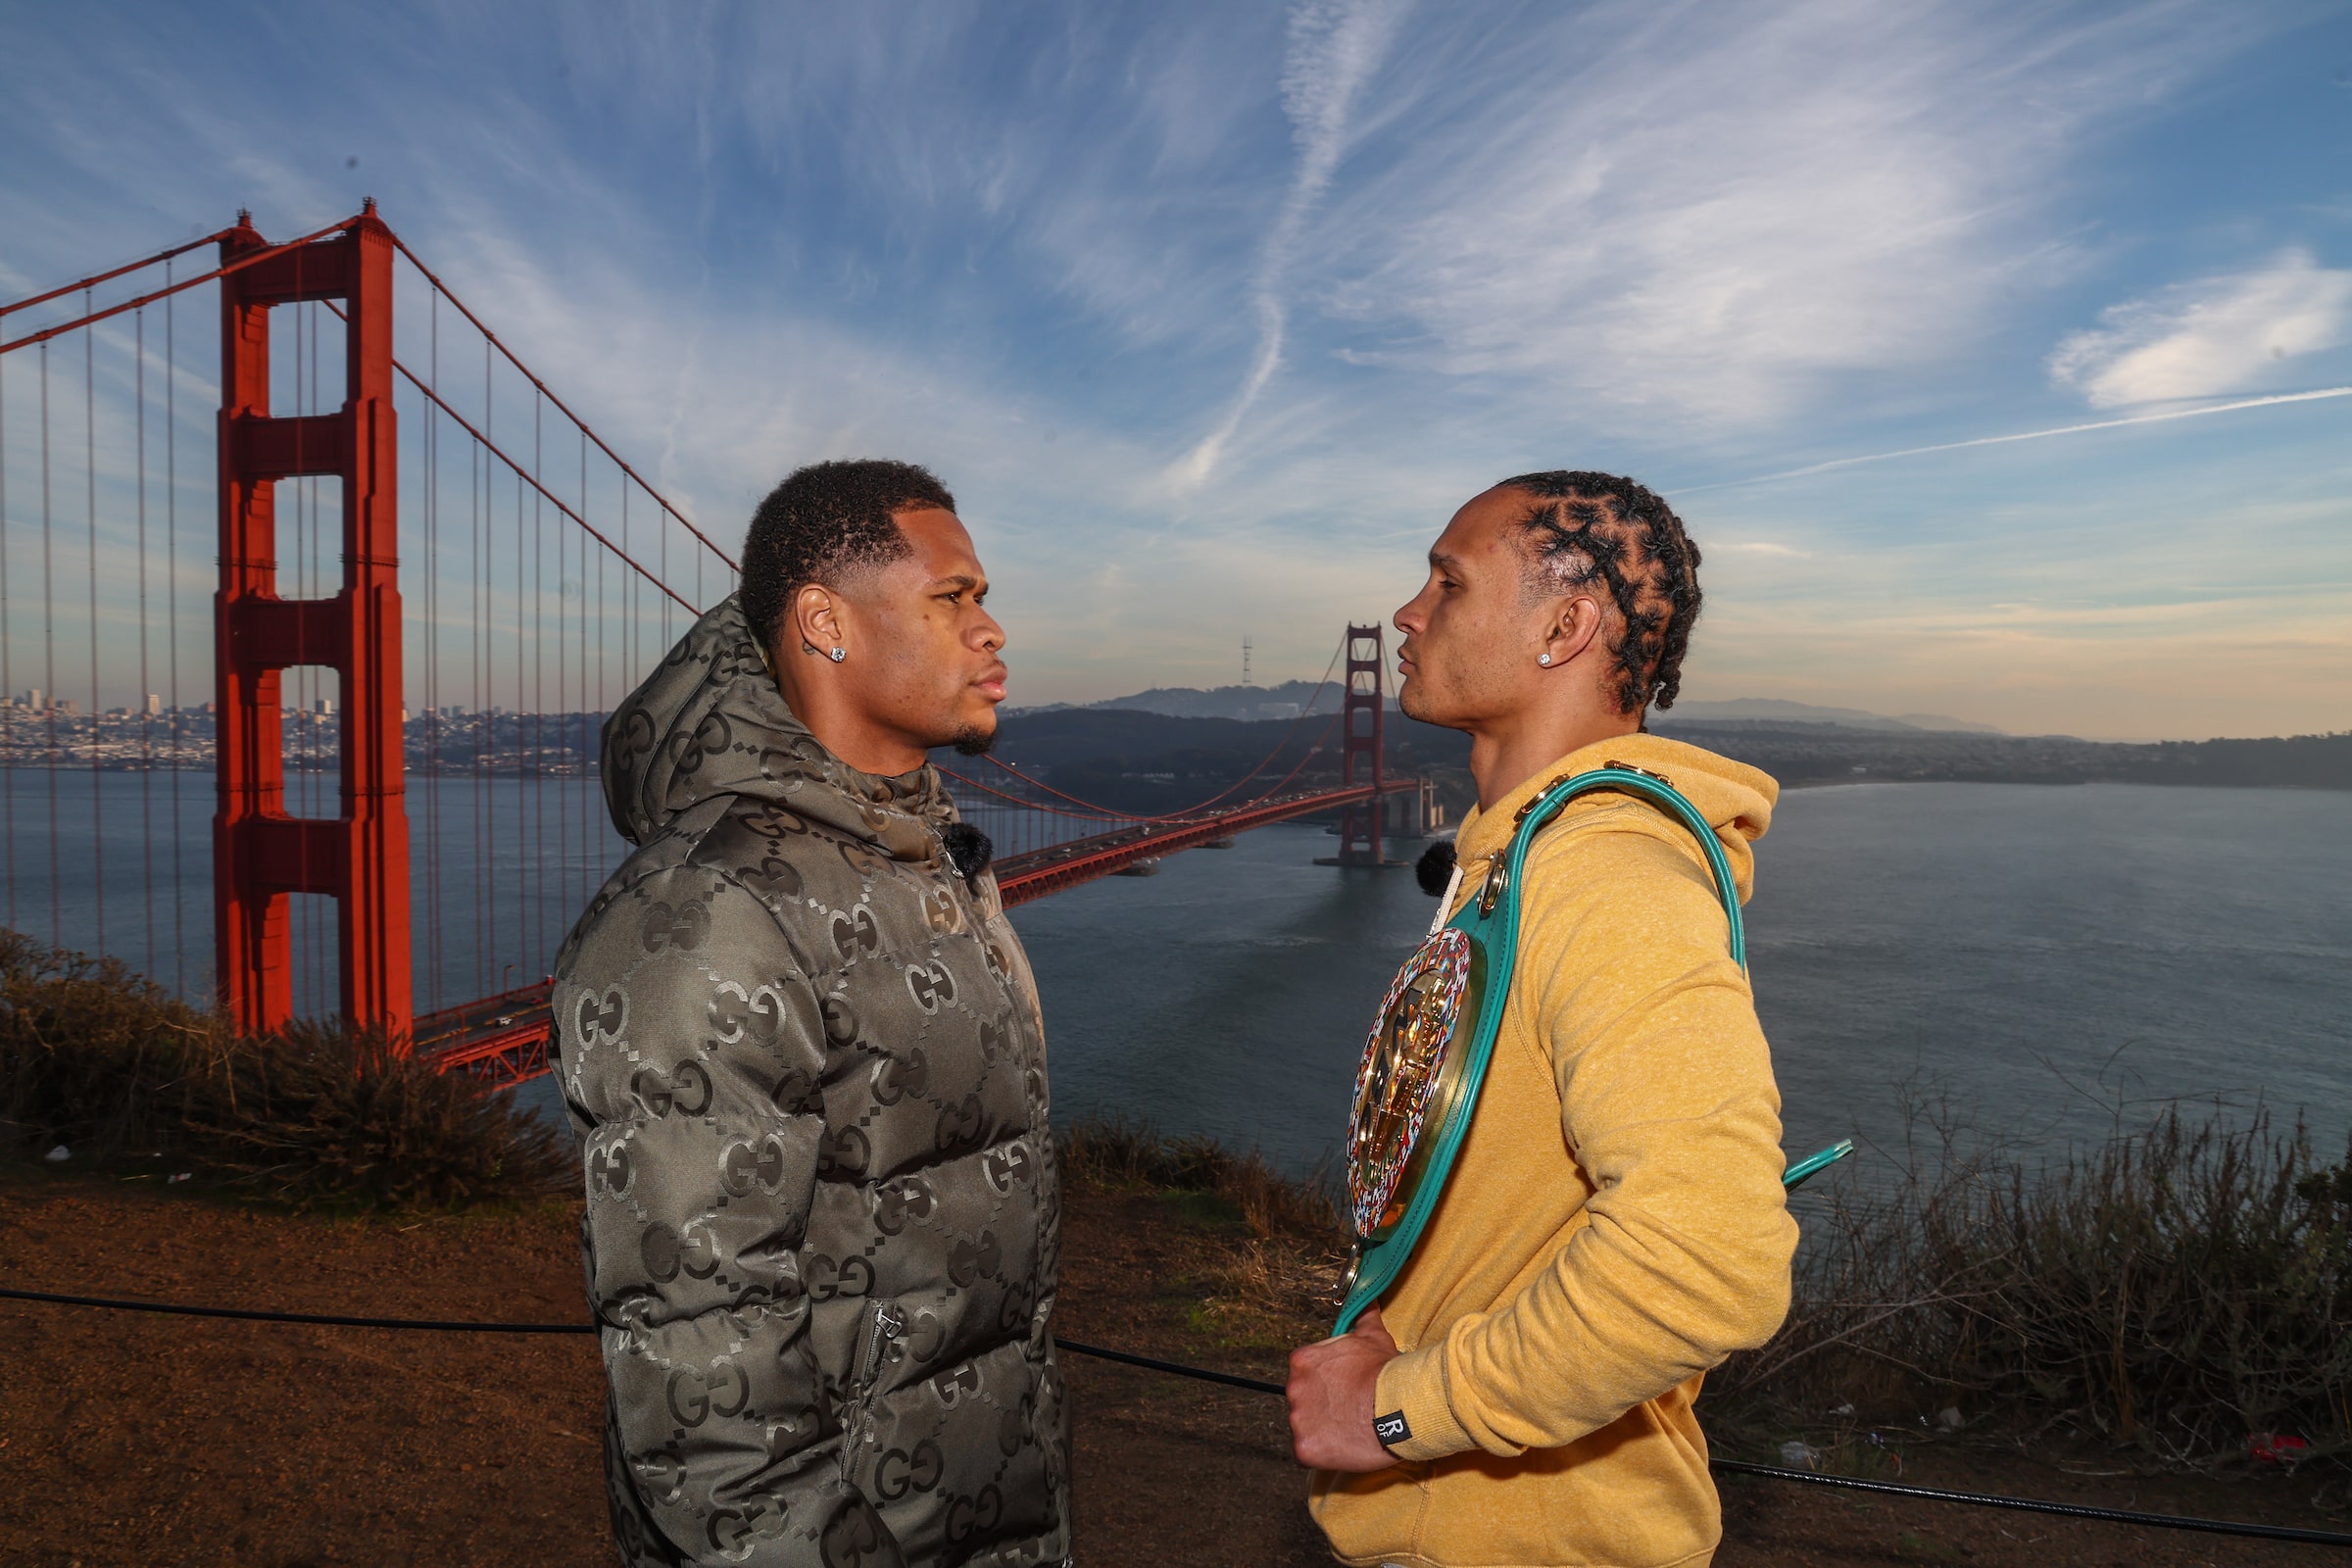 Prograis accuses Hearn of favouring Haney